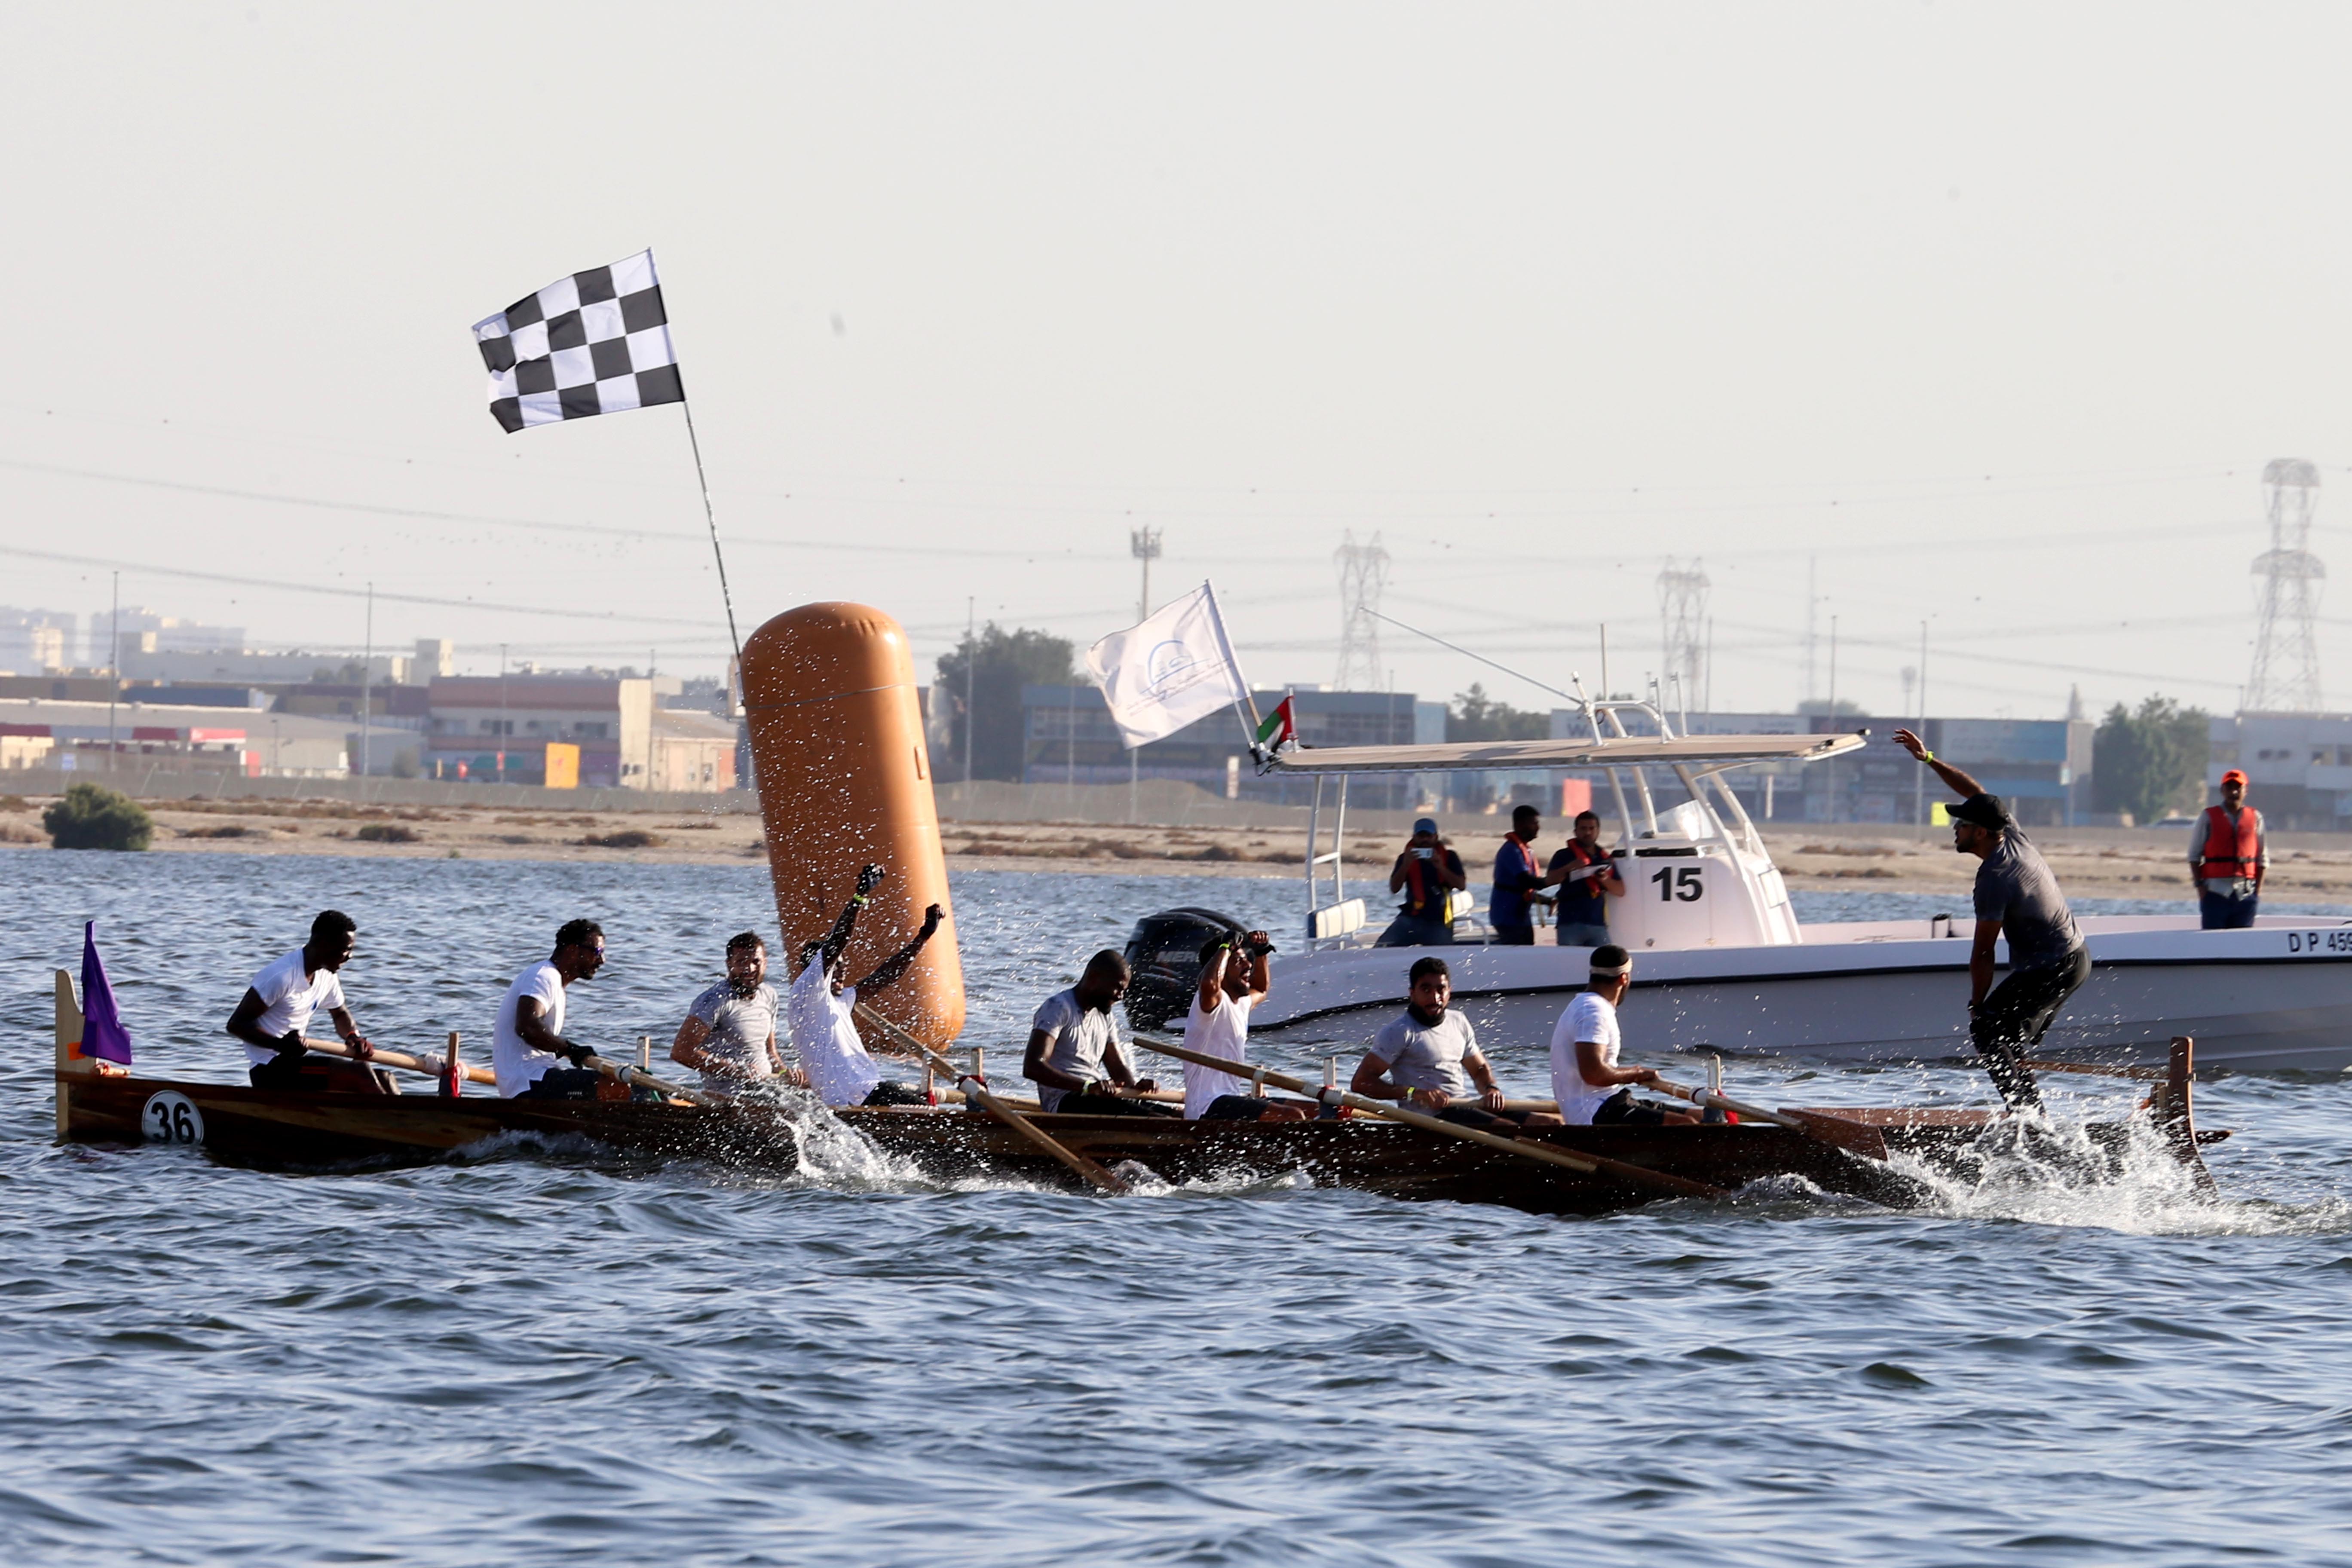 Al Asefa Champion of the Most Expensive Championships in Traditional Rowing